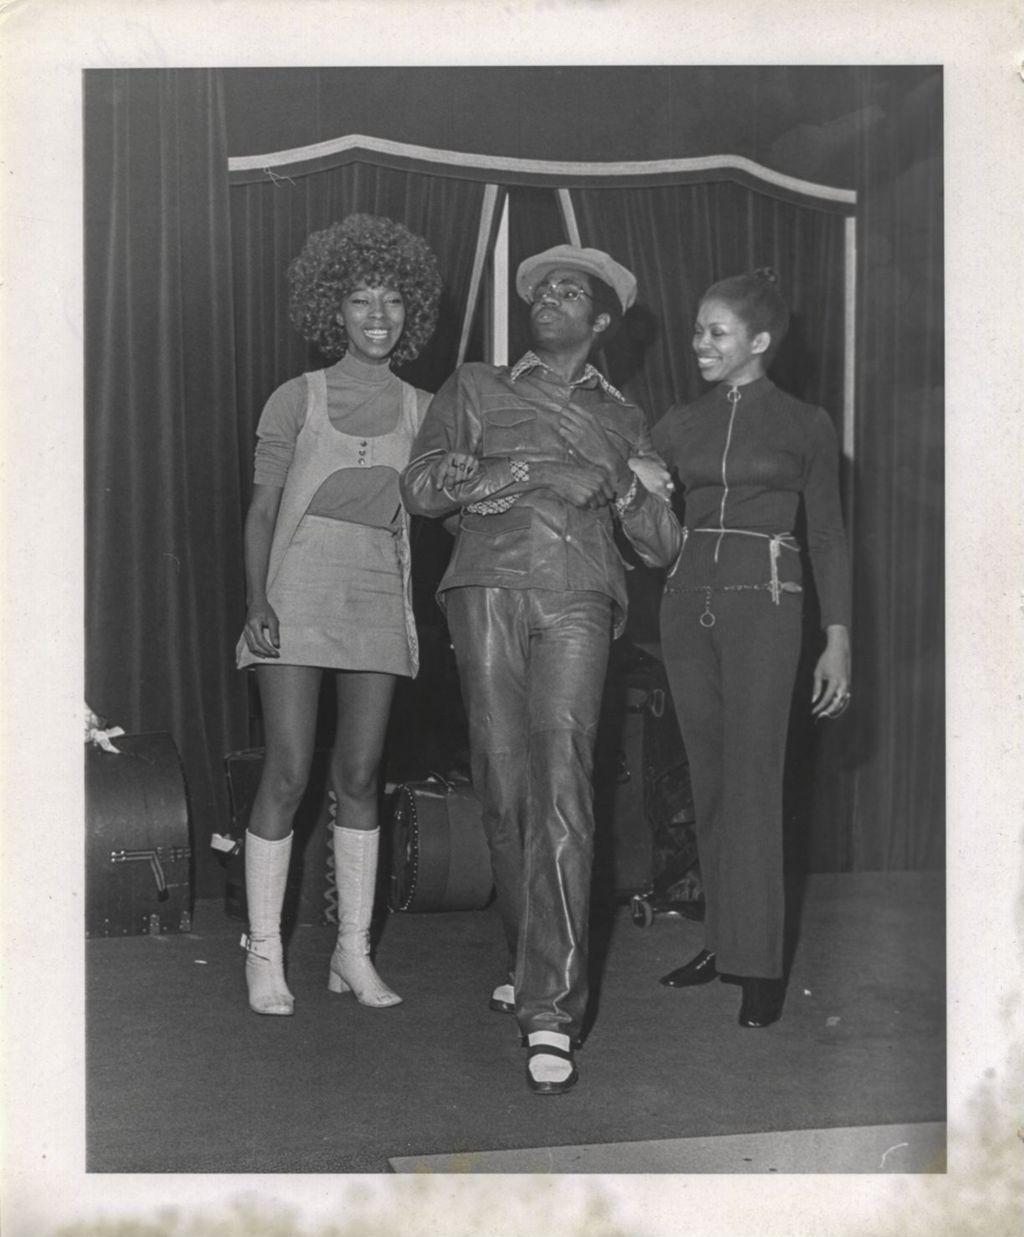 Miniature of Three people modeling fashions at a "We Care" event